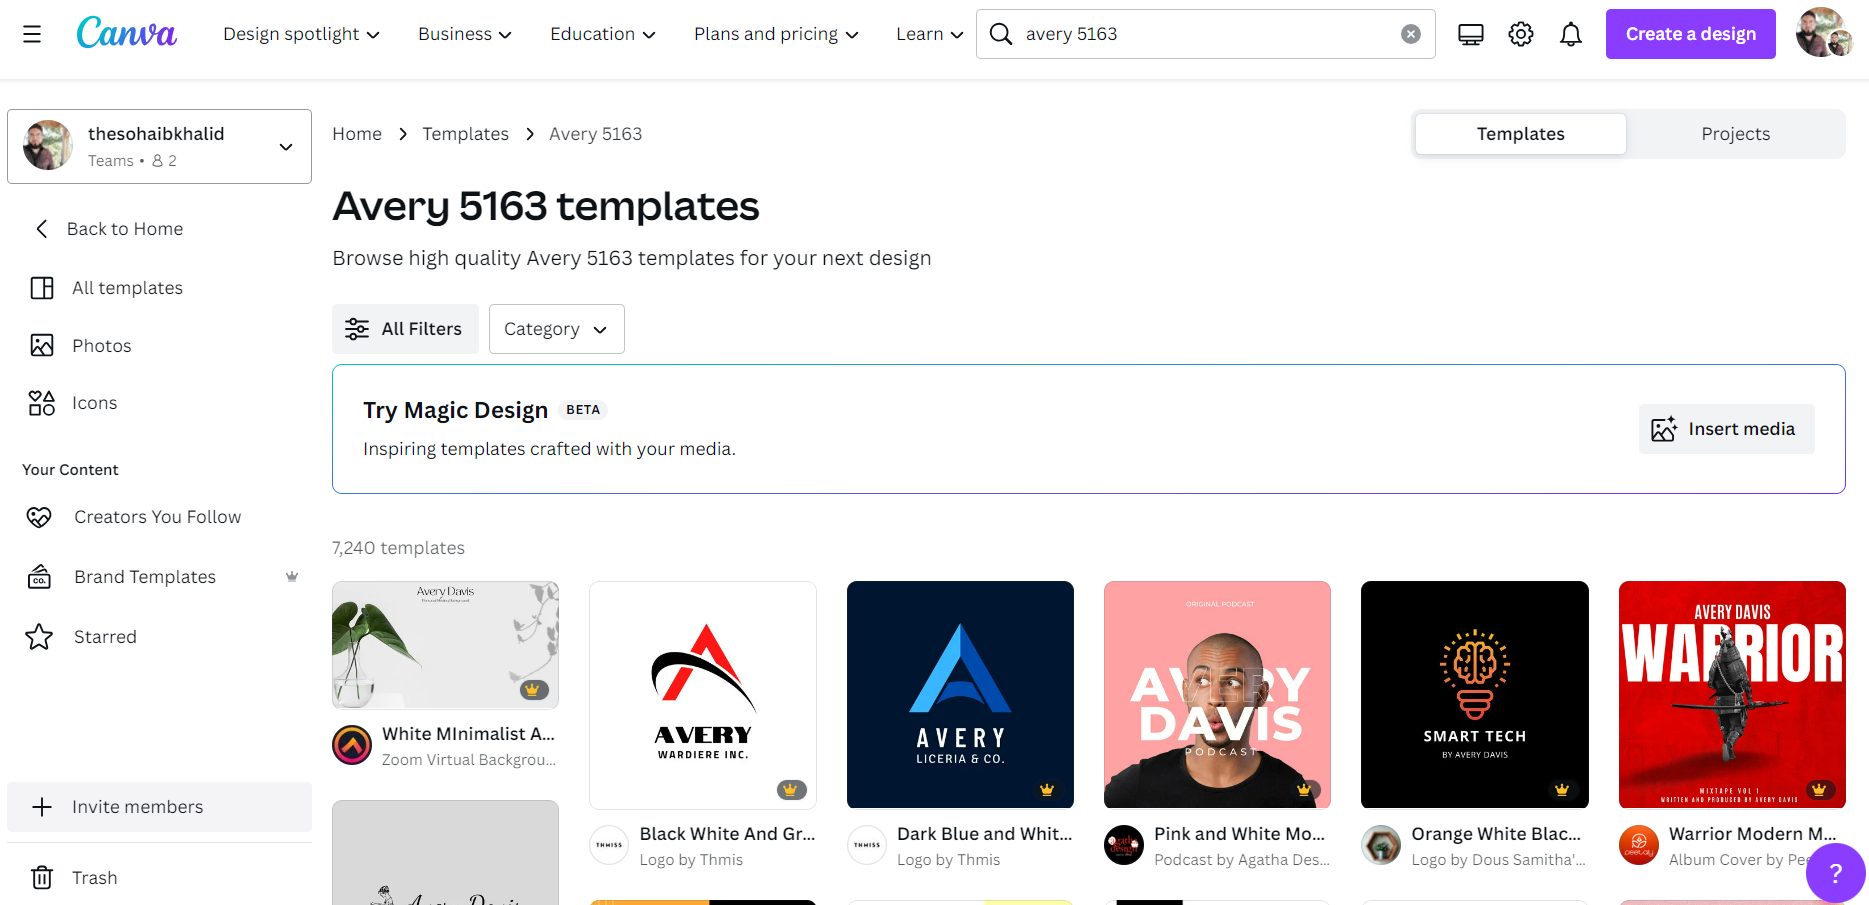 Avery 5163 templates in canva